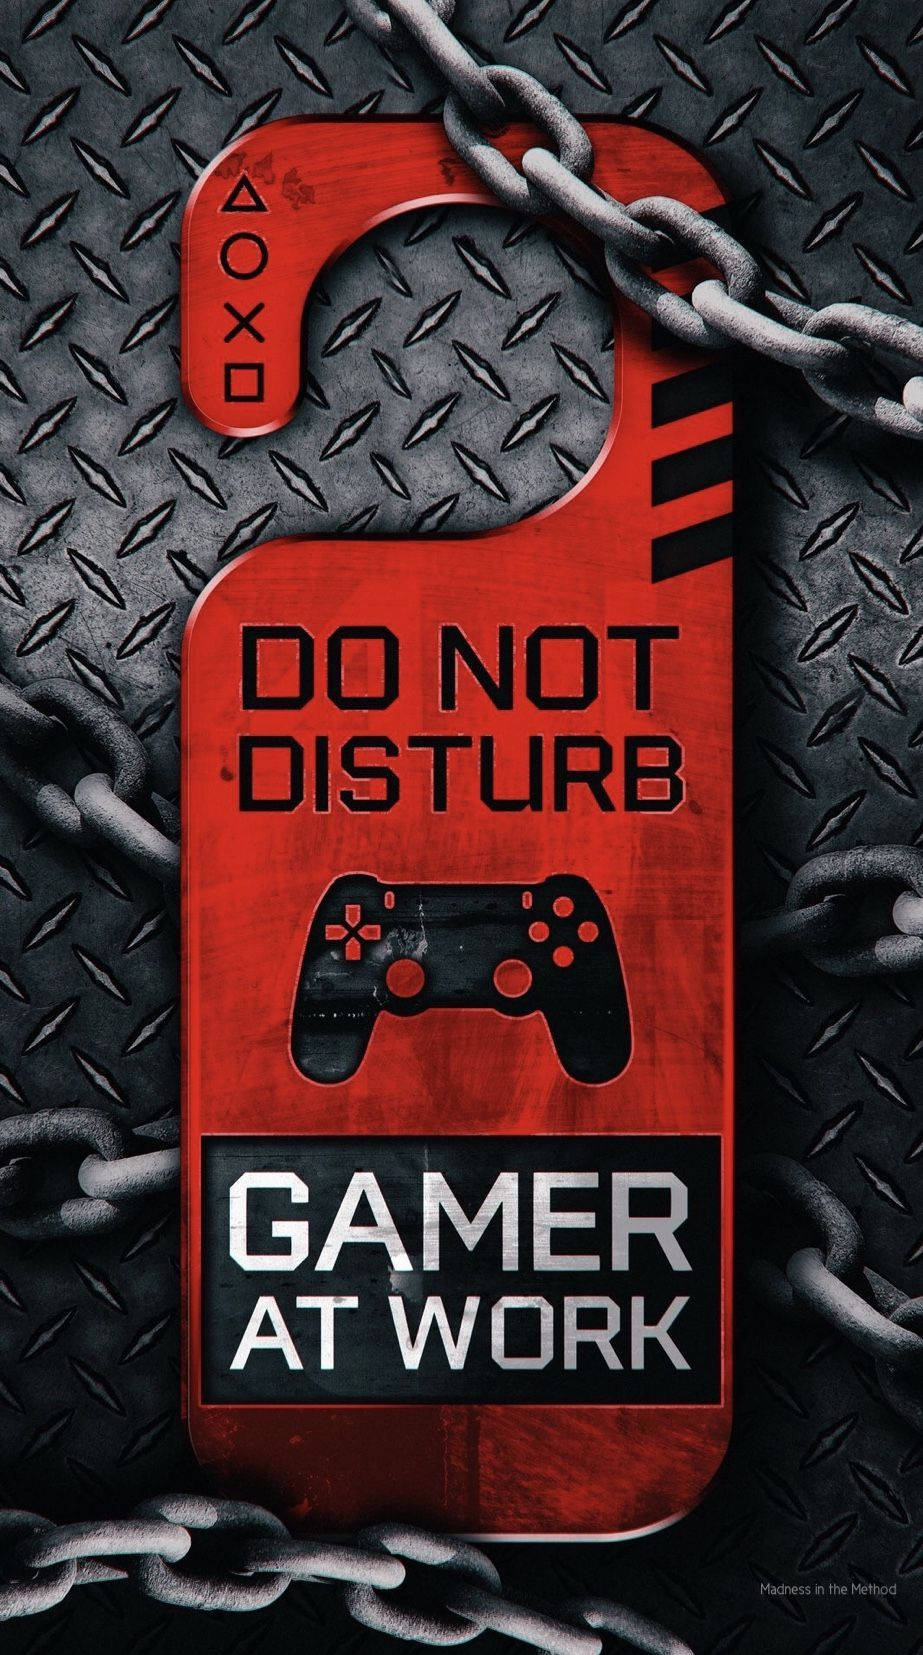 Do Not Disturb Gamer At Work Picture